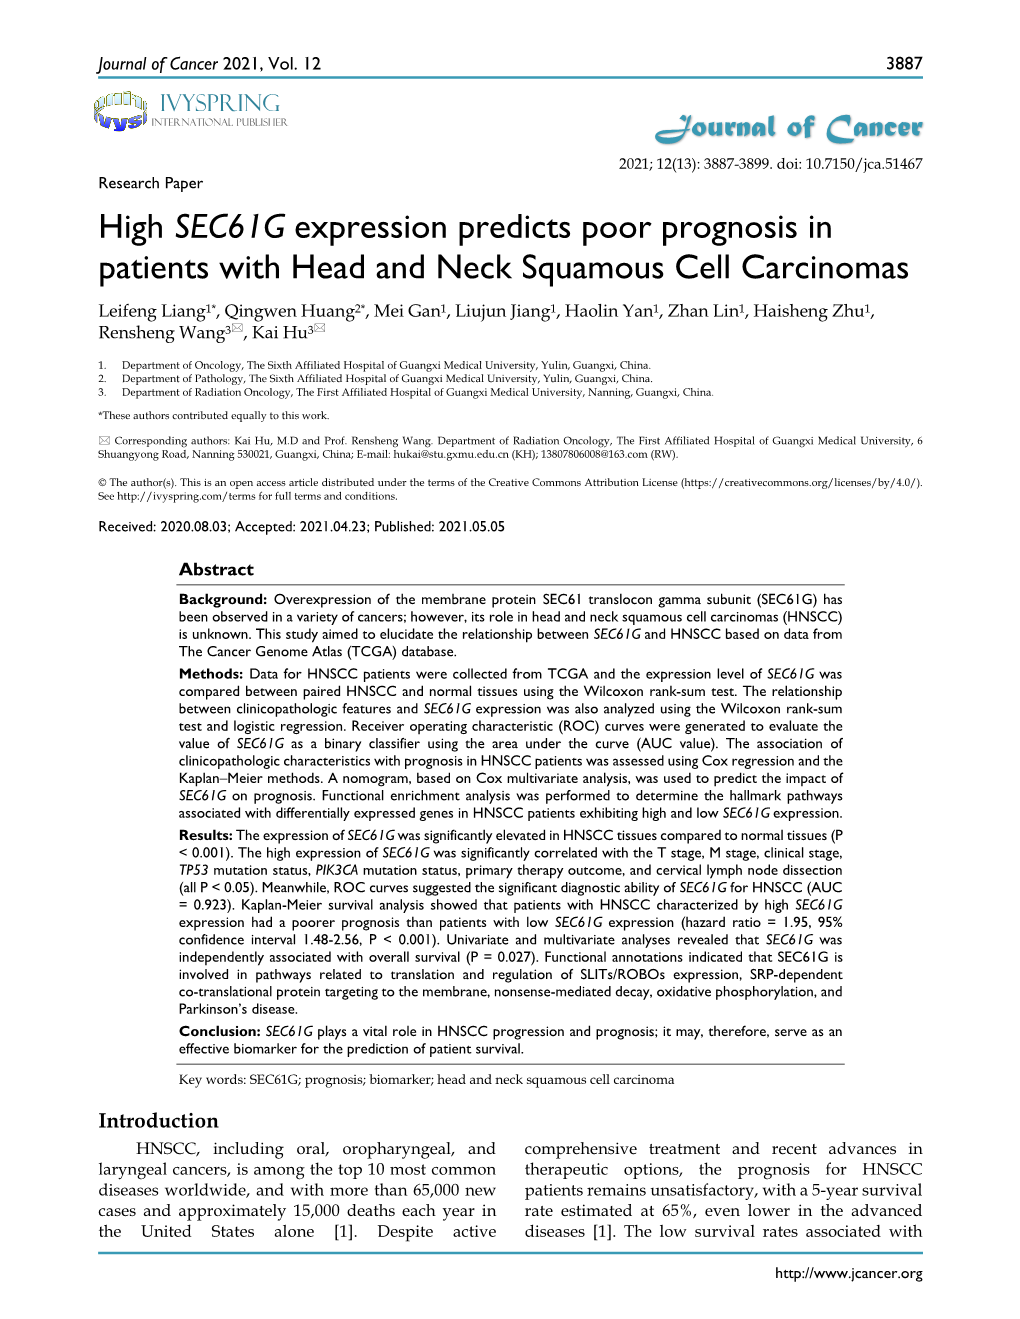 High SEC61G Expression Predicts Poor Prognosis in Patients with Head and Neck Squamous Cell Carcinomas